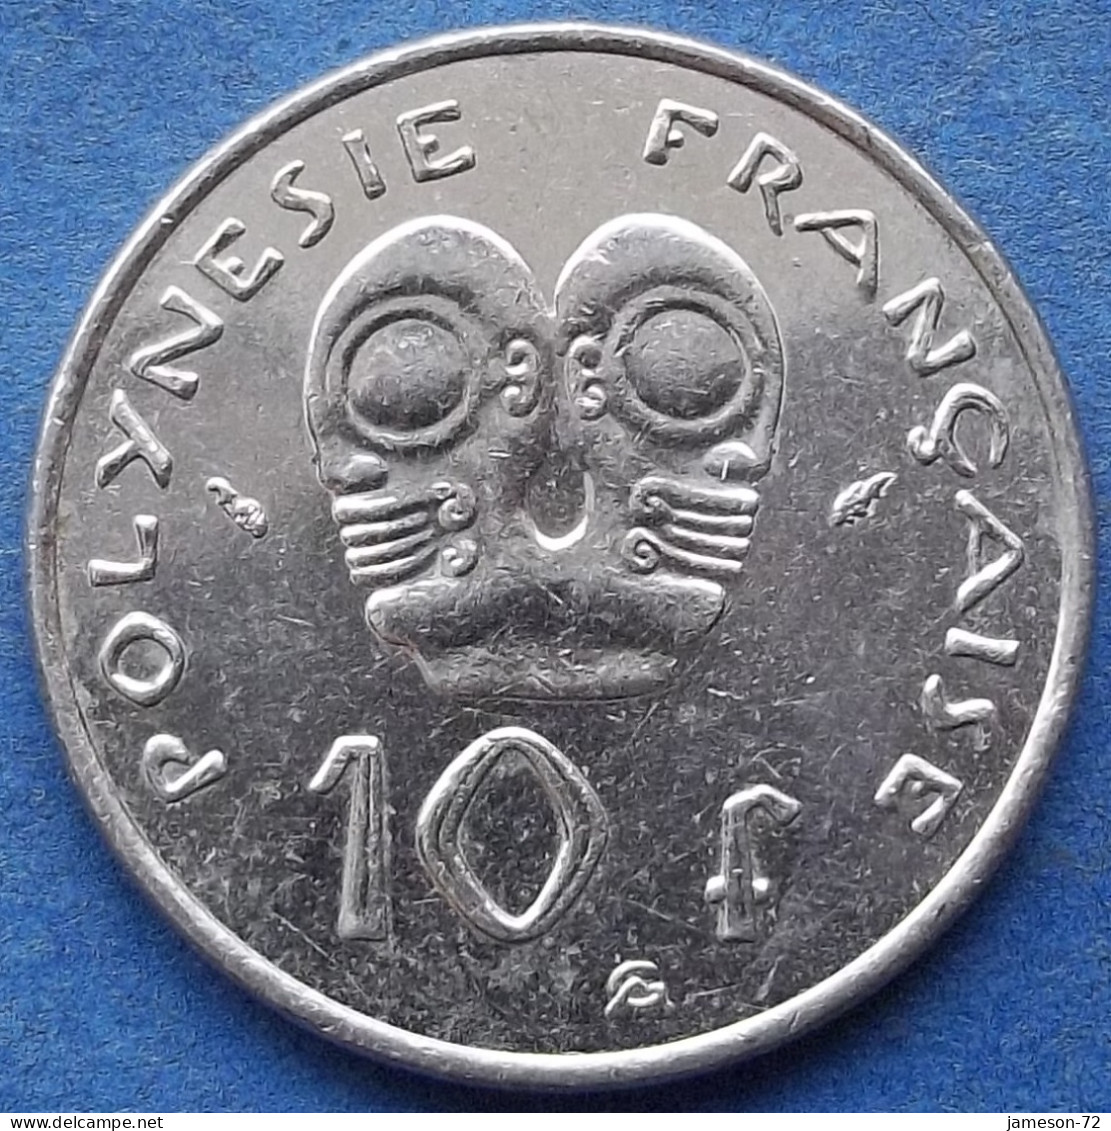 FRENCH POLYNESIA - 10 Francs 1991 KM# 8 French Overseas Territory - Edelweiss Coins - Frans-Polynesië